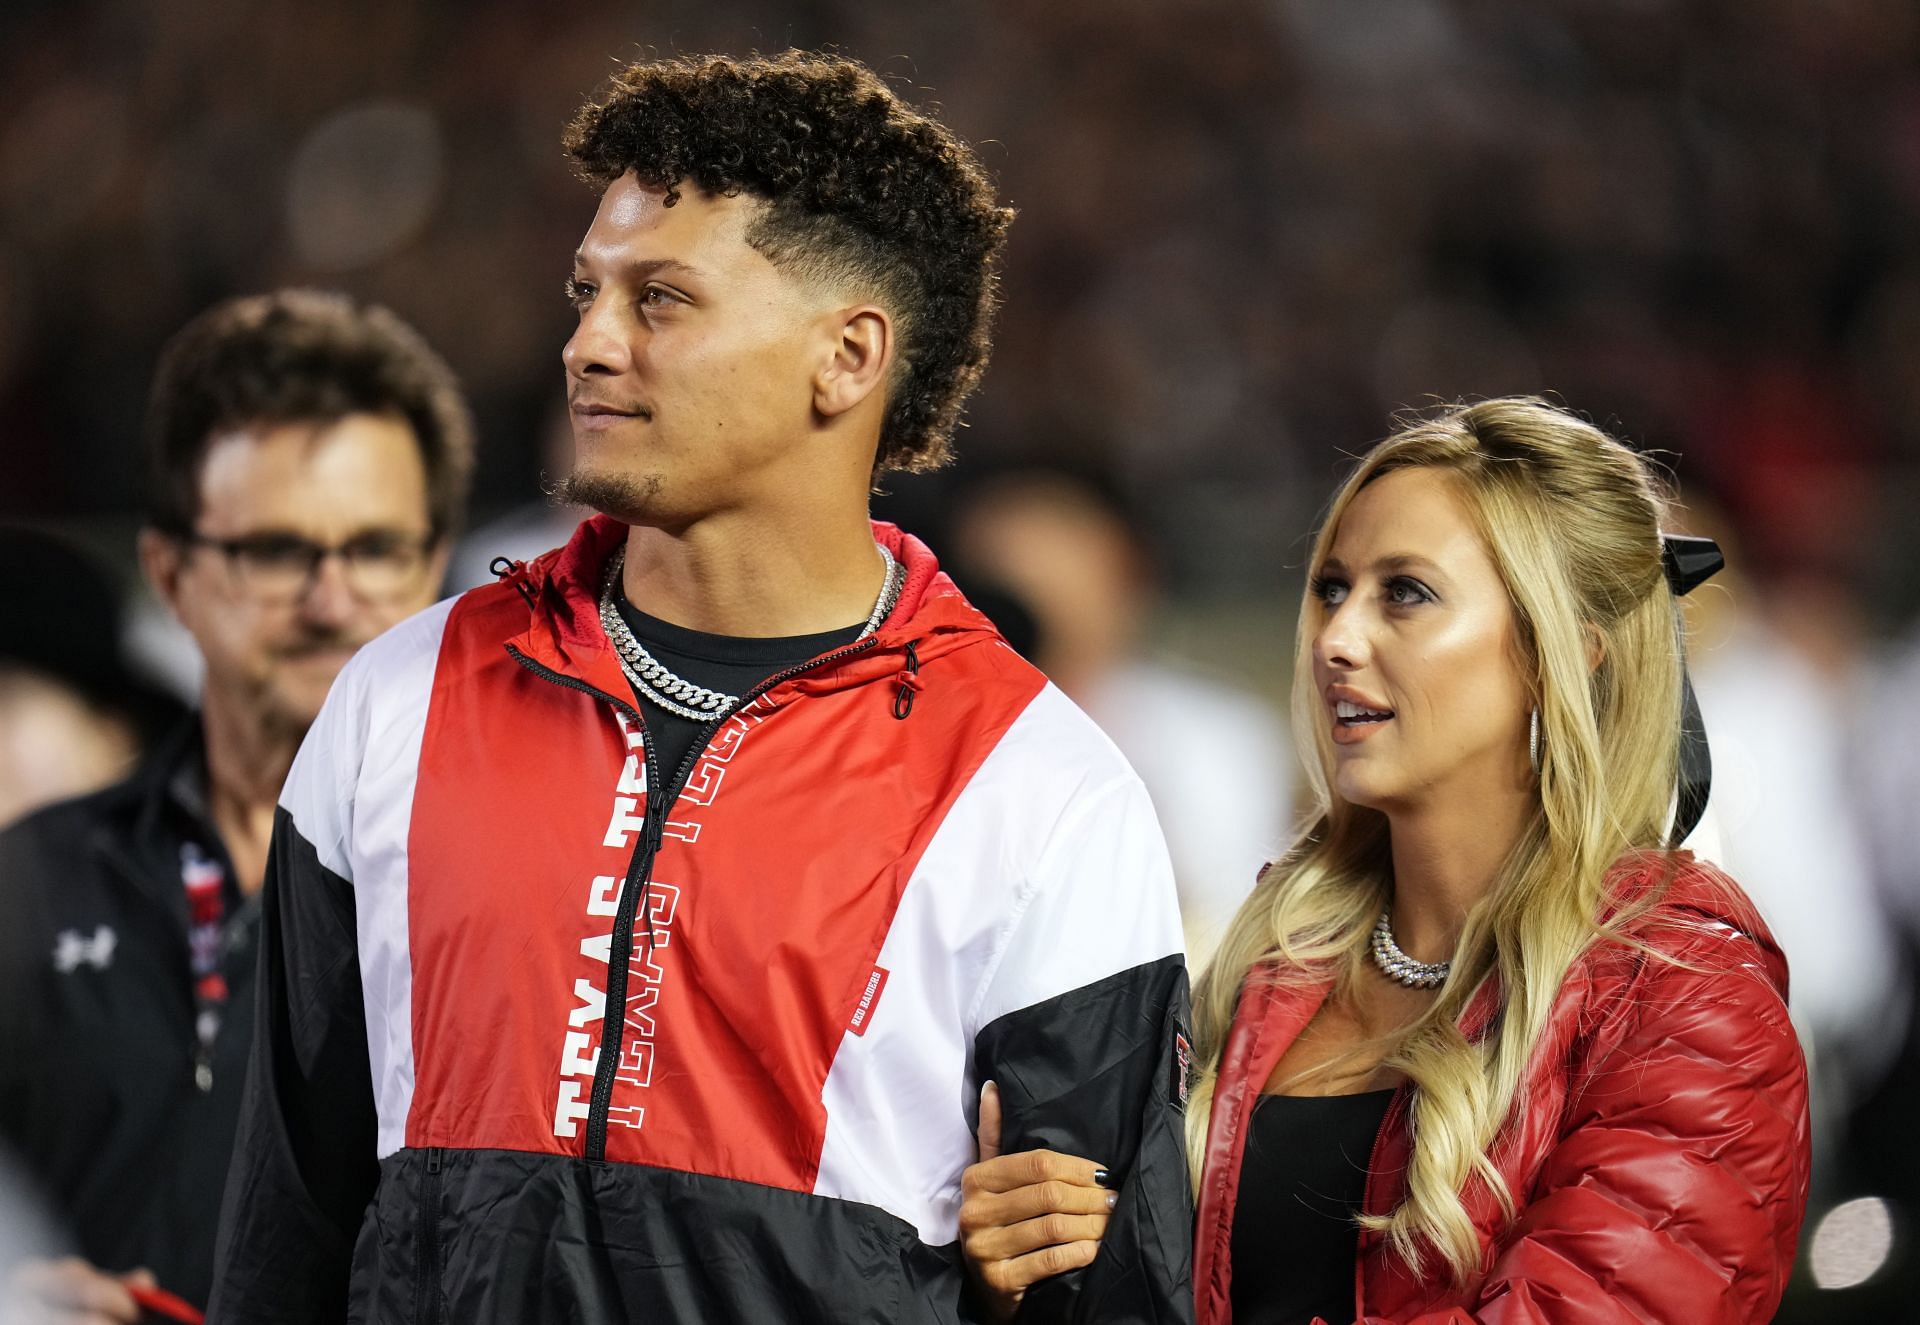 Patrick Mahomes with his wife Brittany